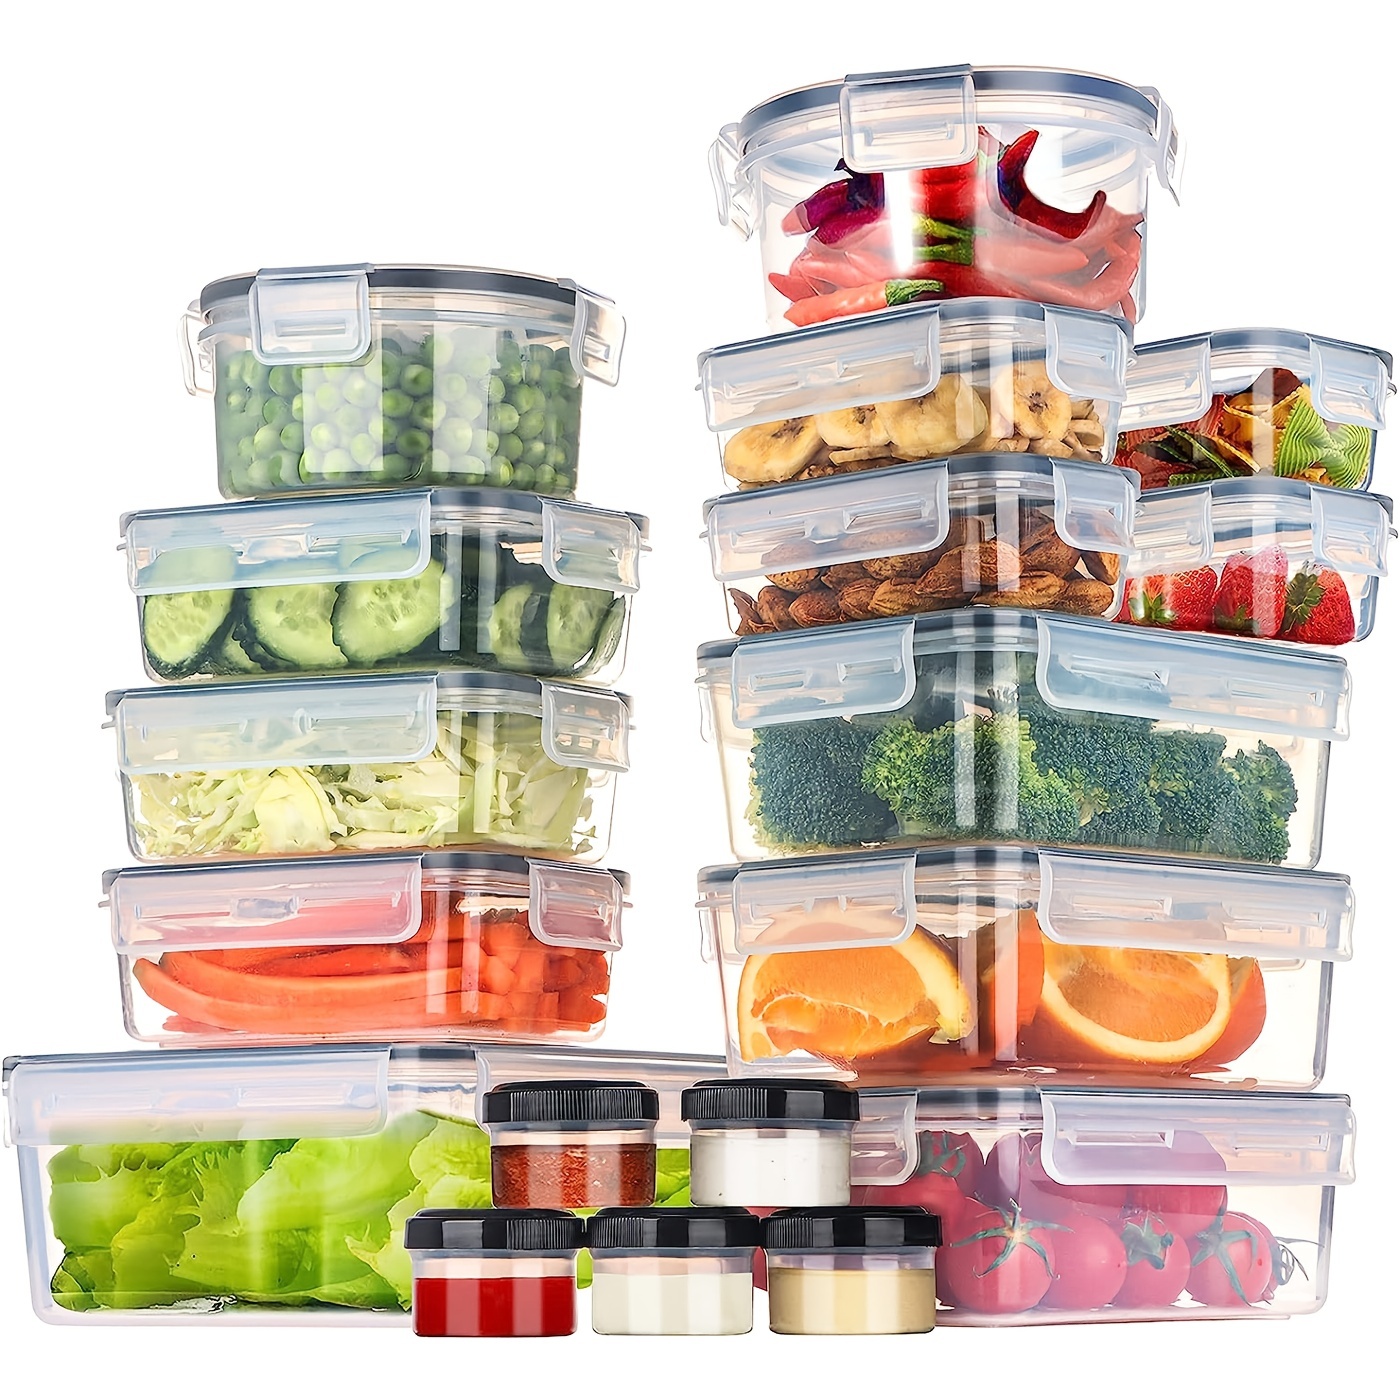 Reli. Meal Prep Containers, 32 oz. | 40 Pack | 3 Compartment Food Container  w/Lids| Microwavable Food Storage Containers/To Go | Black Reusable Bento